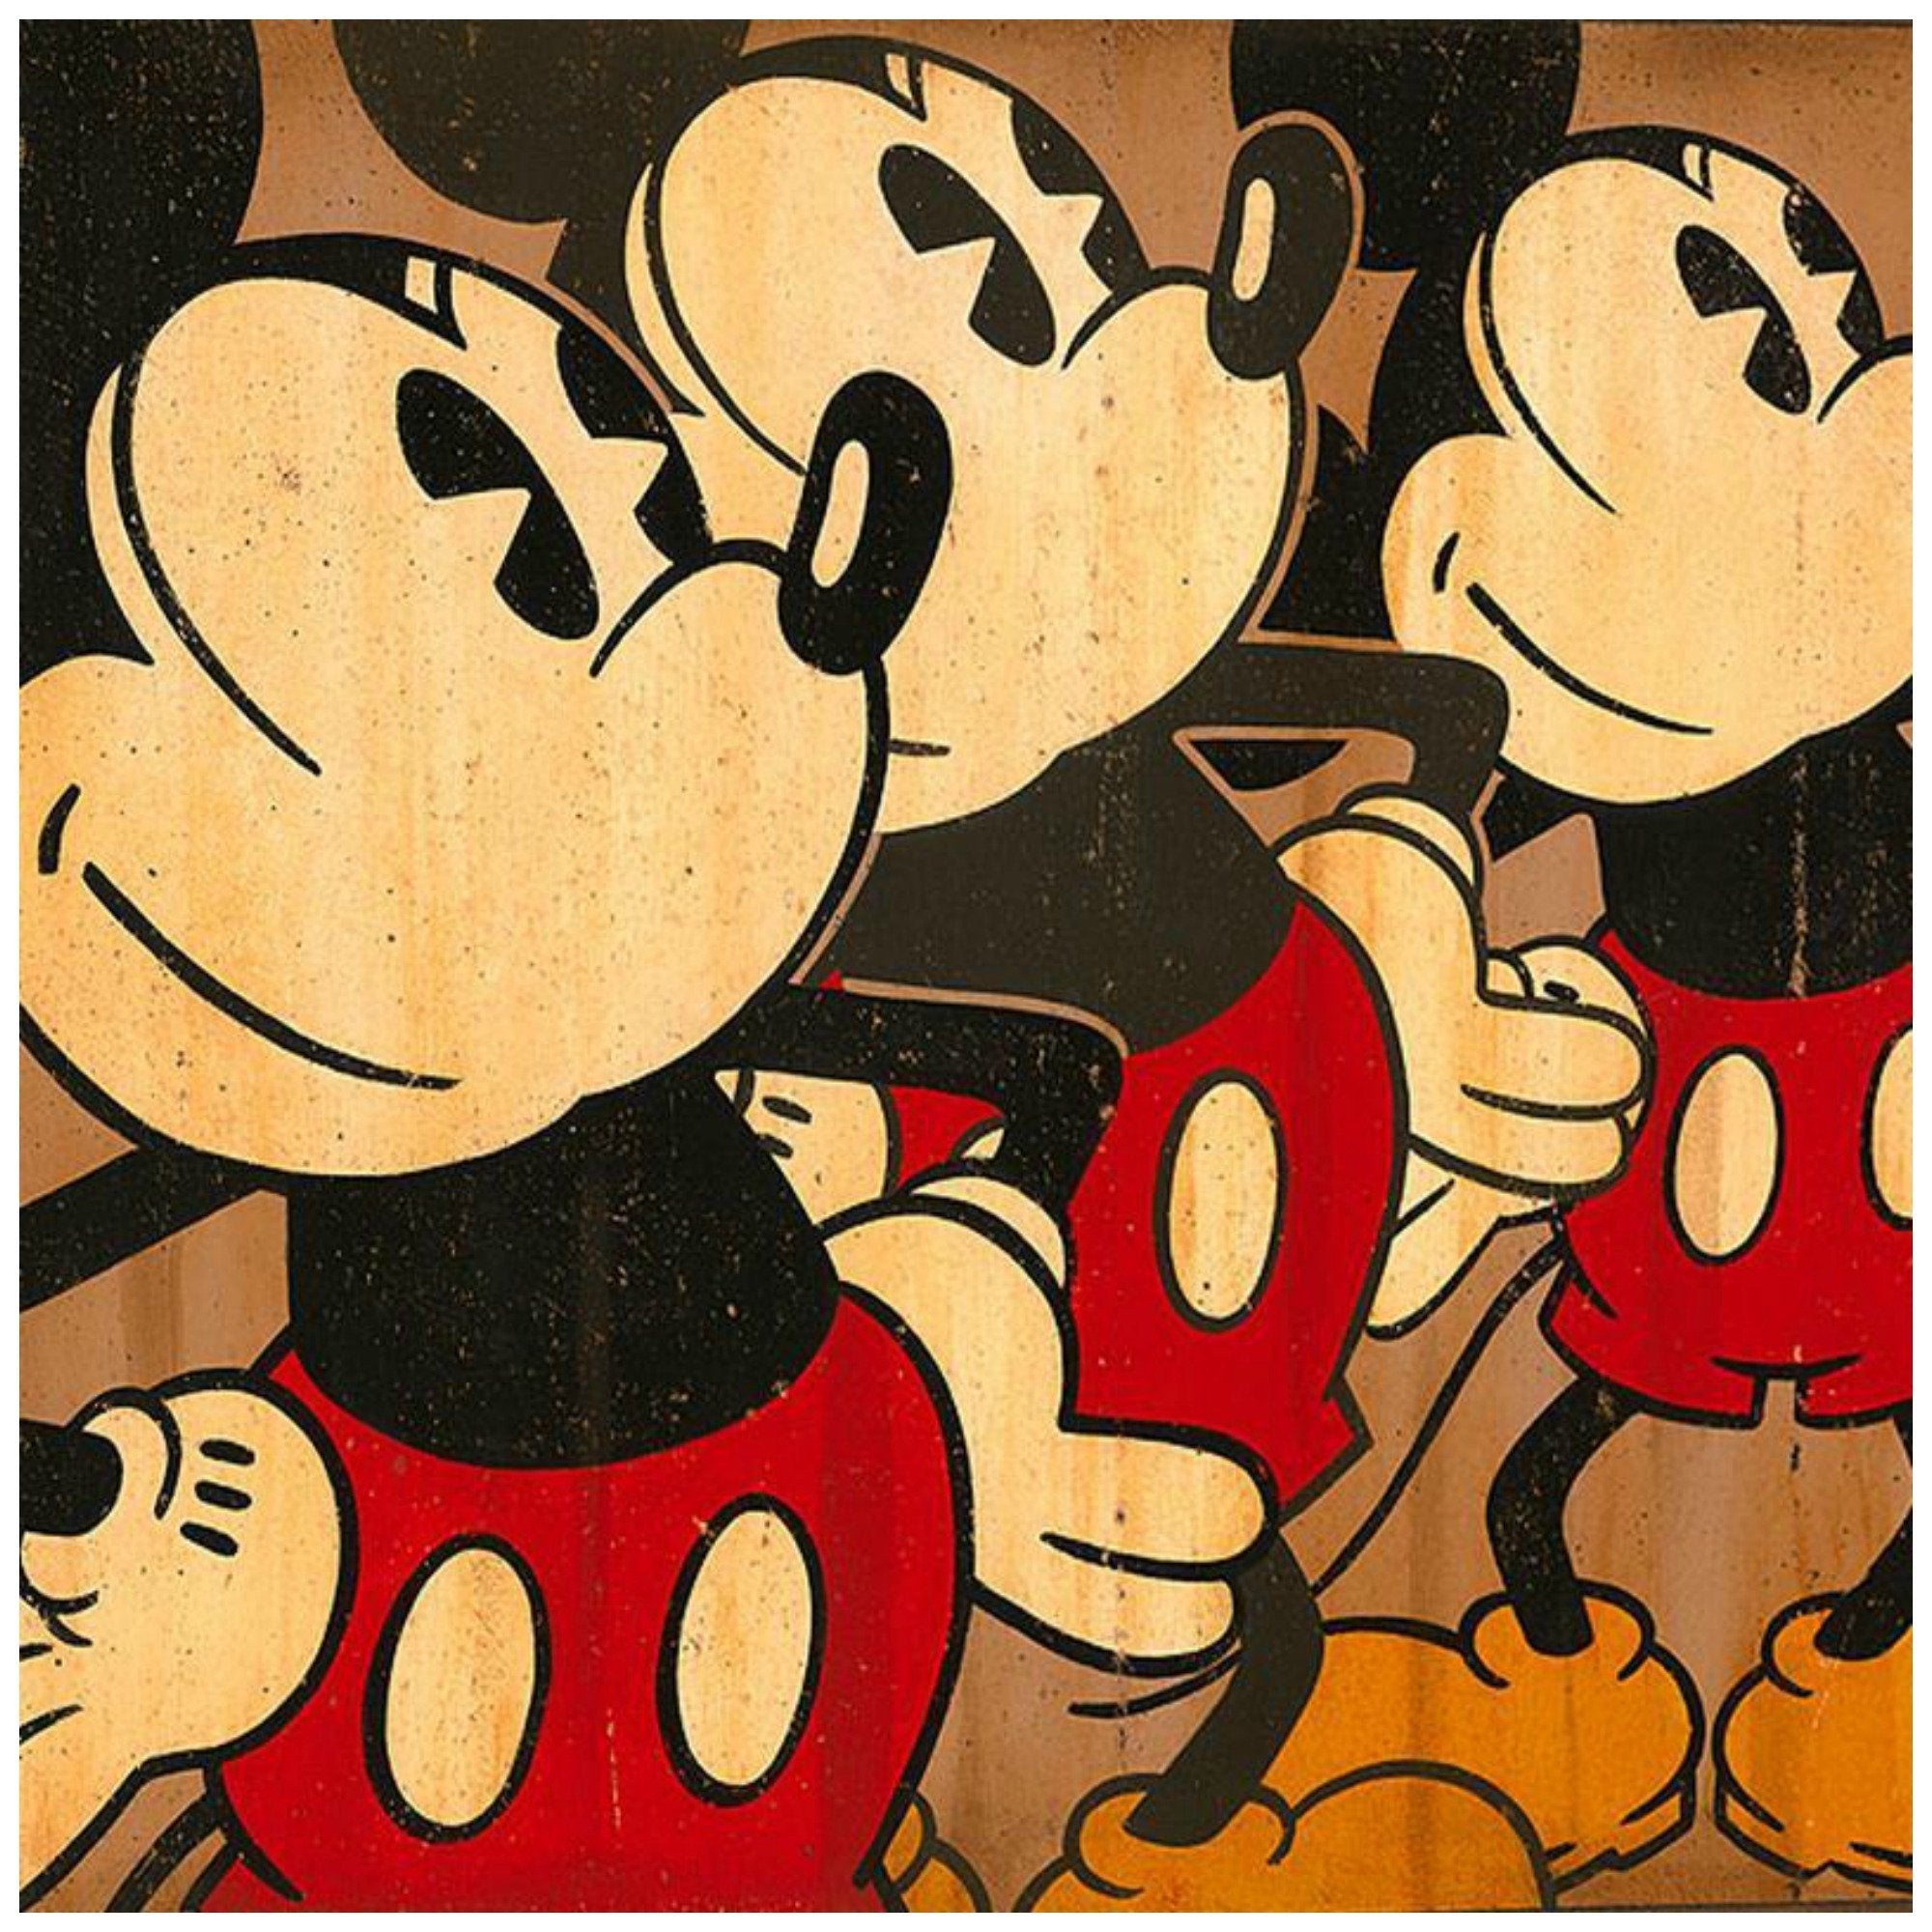 Three Vintage Mickeys by Trevor Carlton  All three Mickeys stand tall with hands resting on the hips - closeup